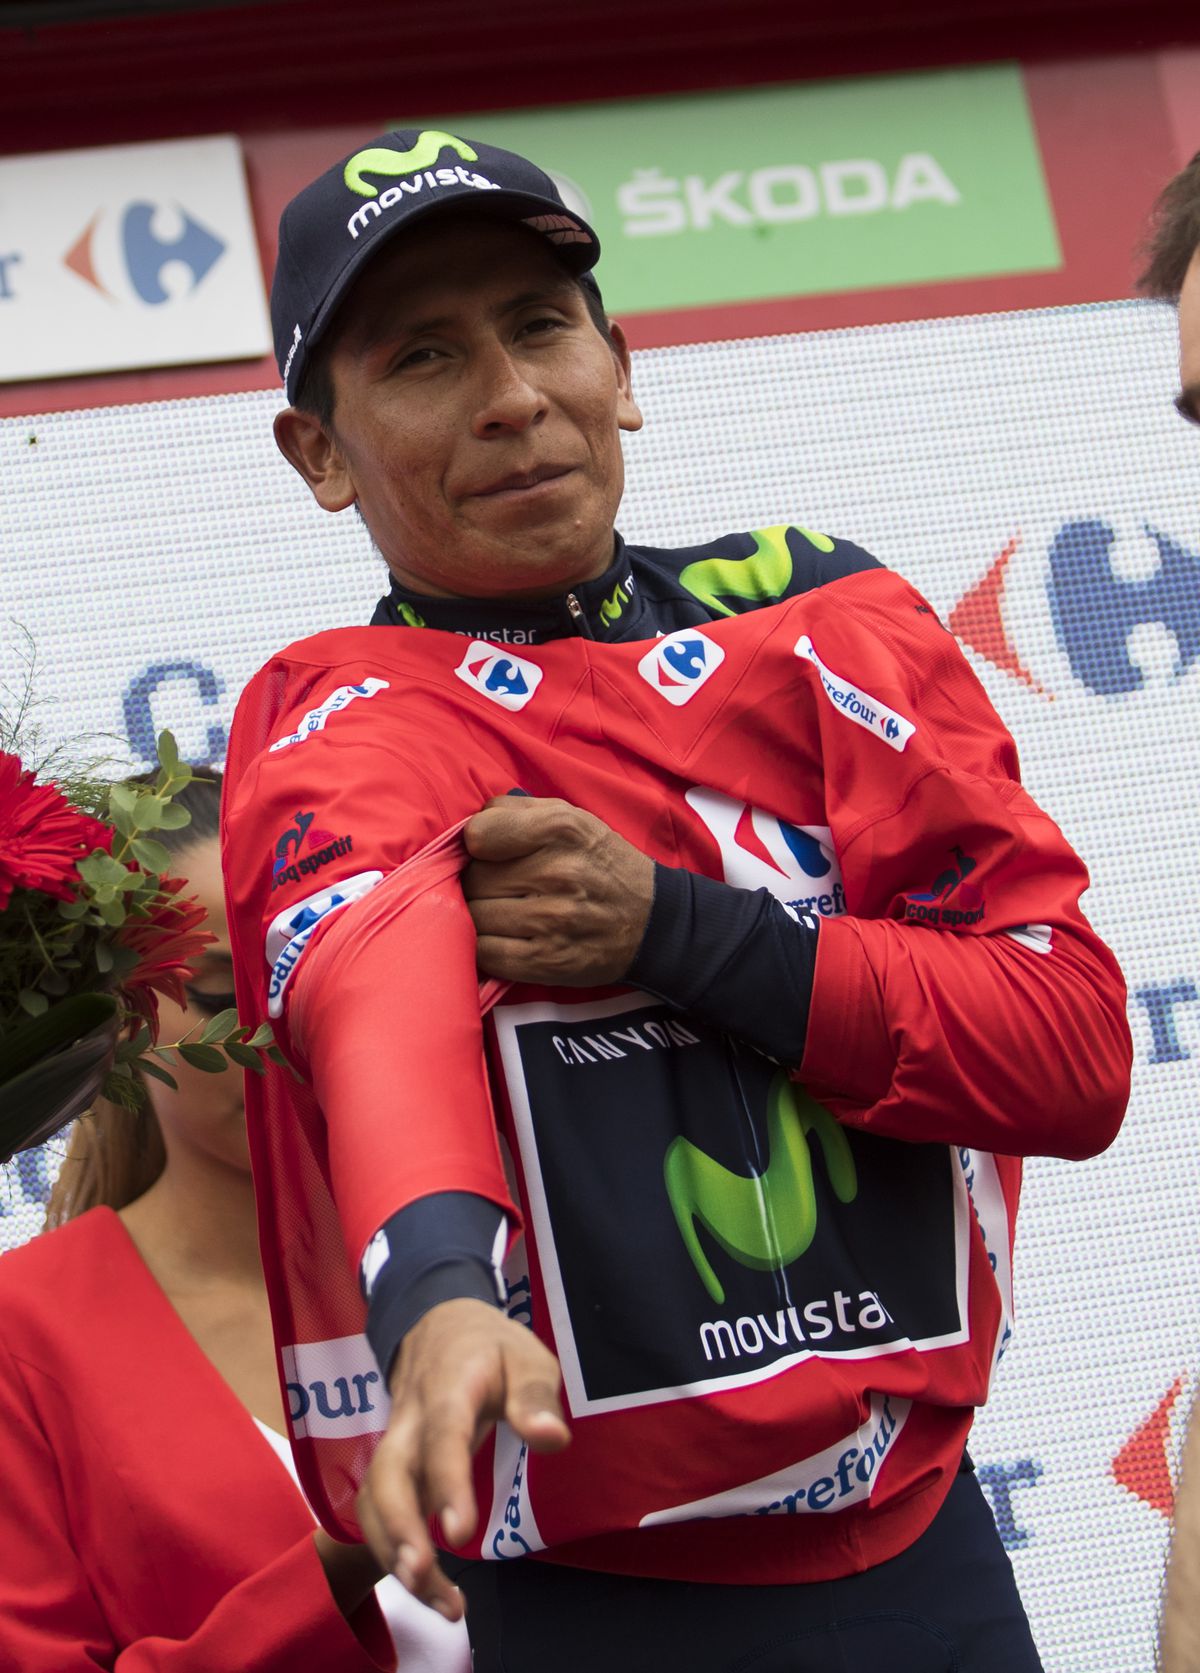 Quintana back in Red